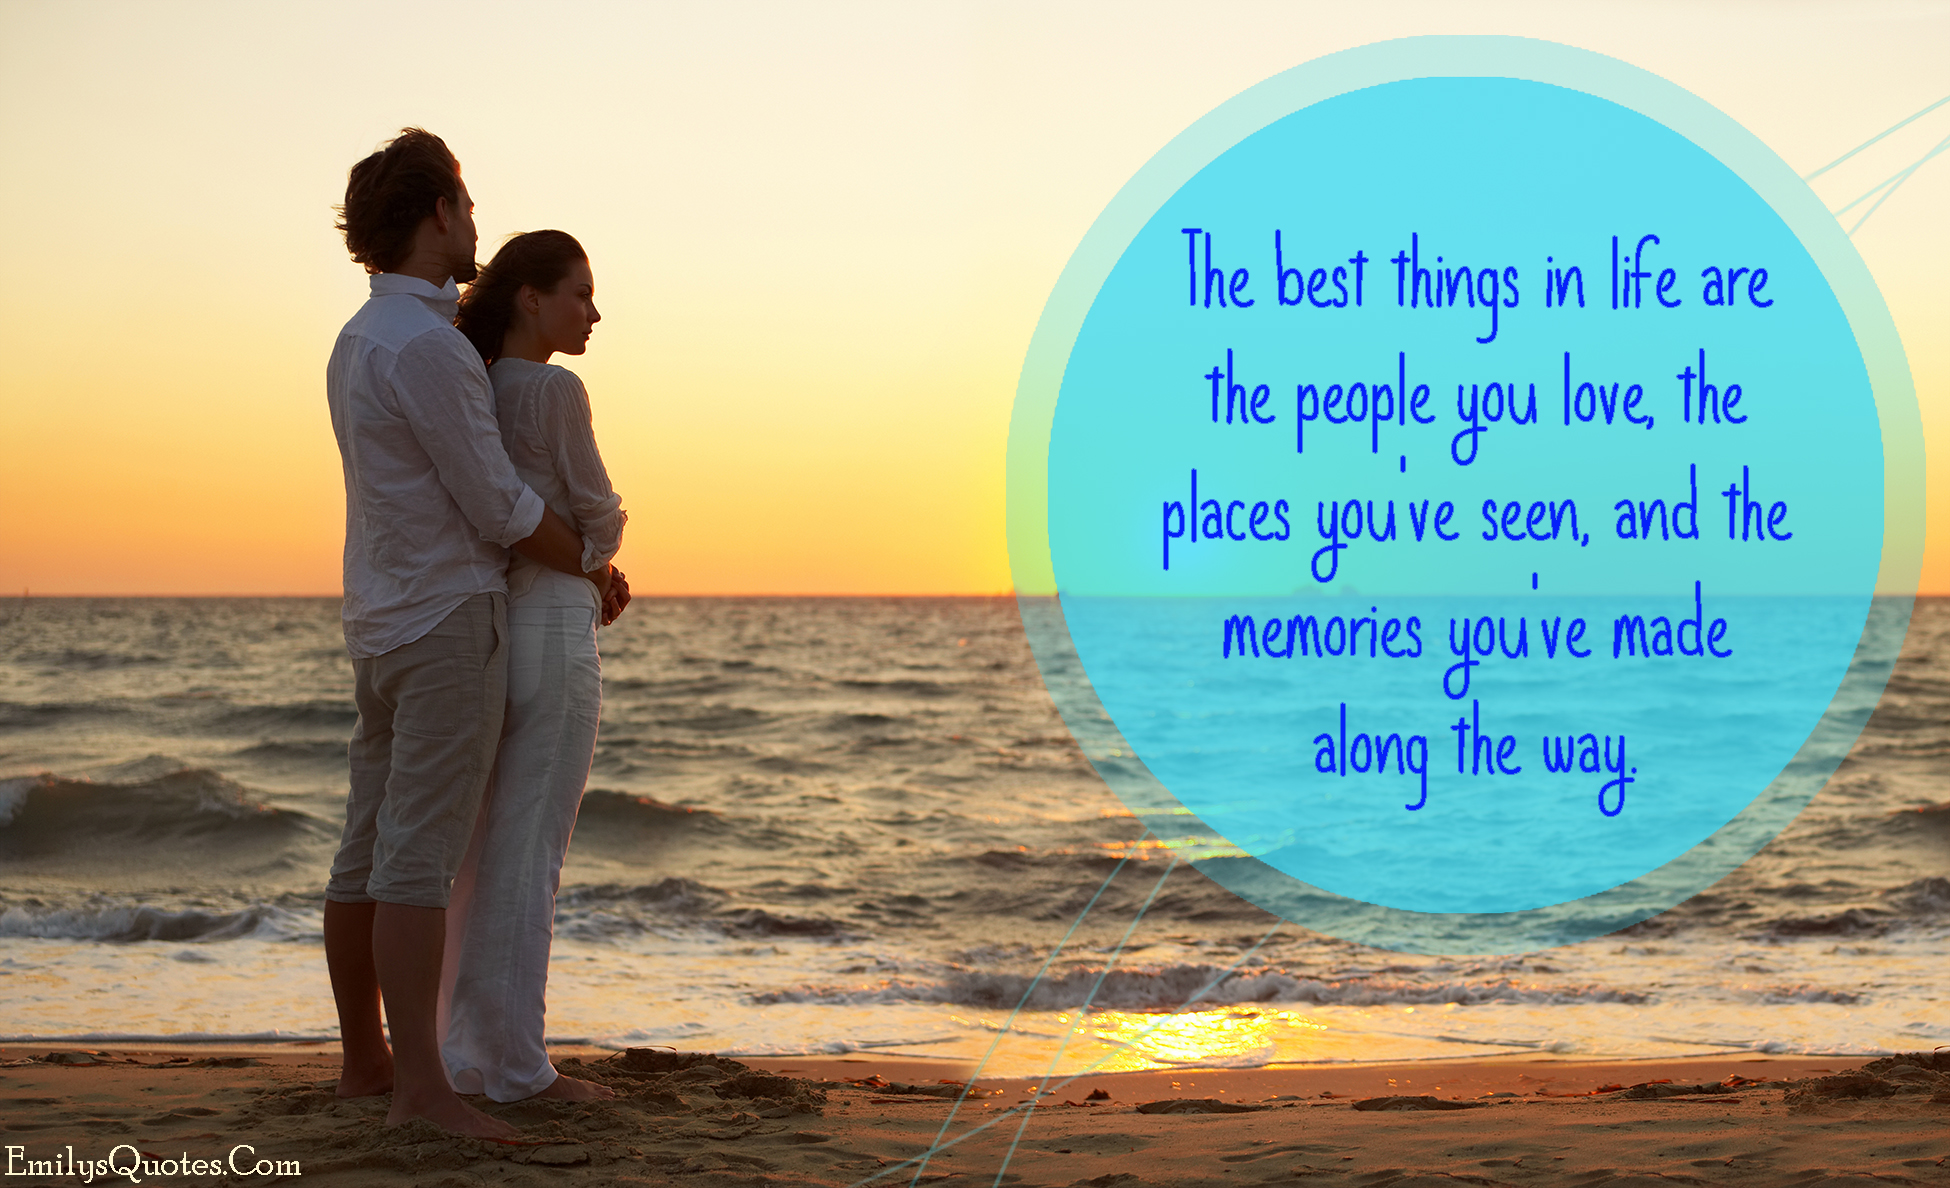 The best things in life are the people you love, the places you’ve seen, and the memories you’ve made along the way